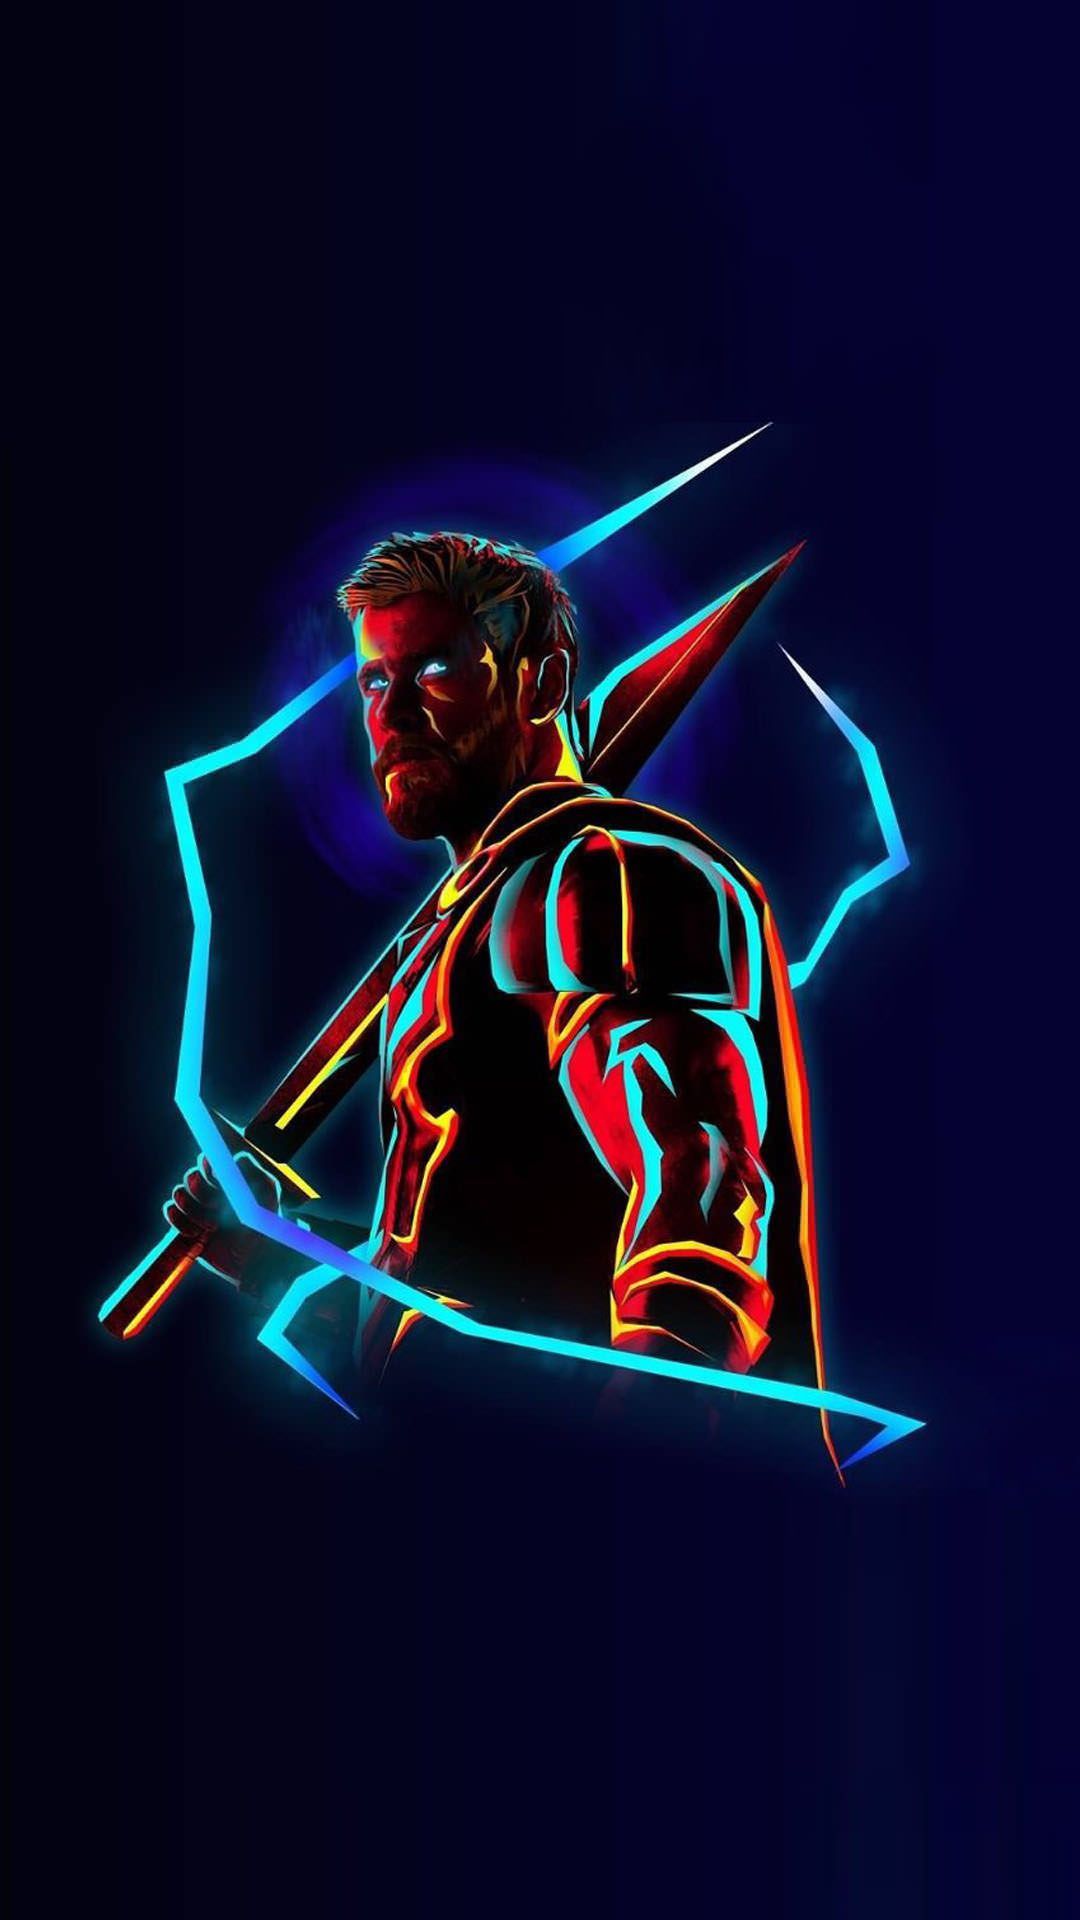 Highscreen Thor live wallpapers free download. Android live wallpapers for  Highscreen Thor.